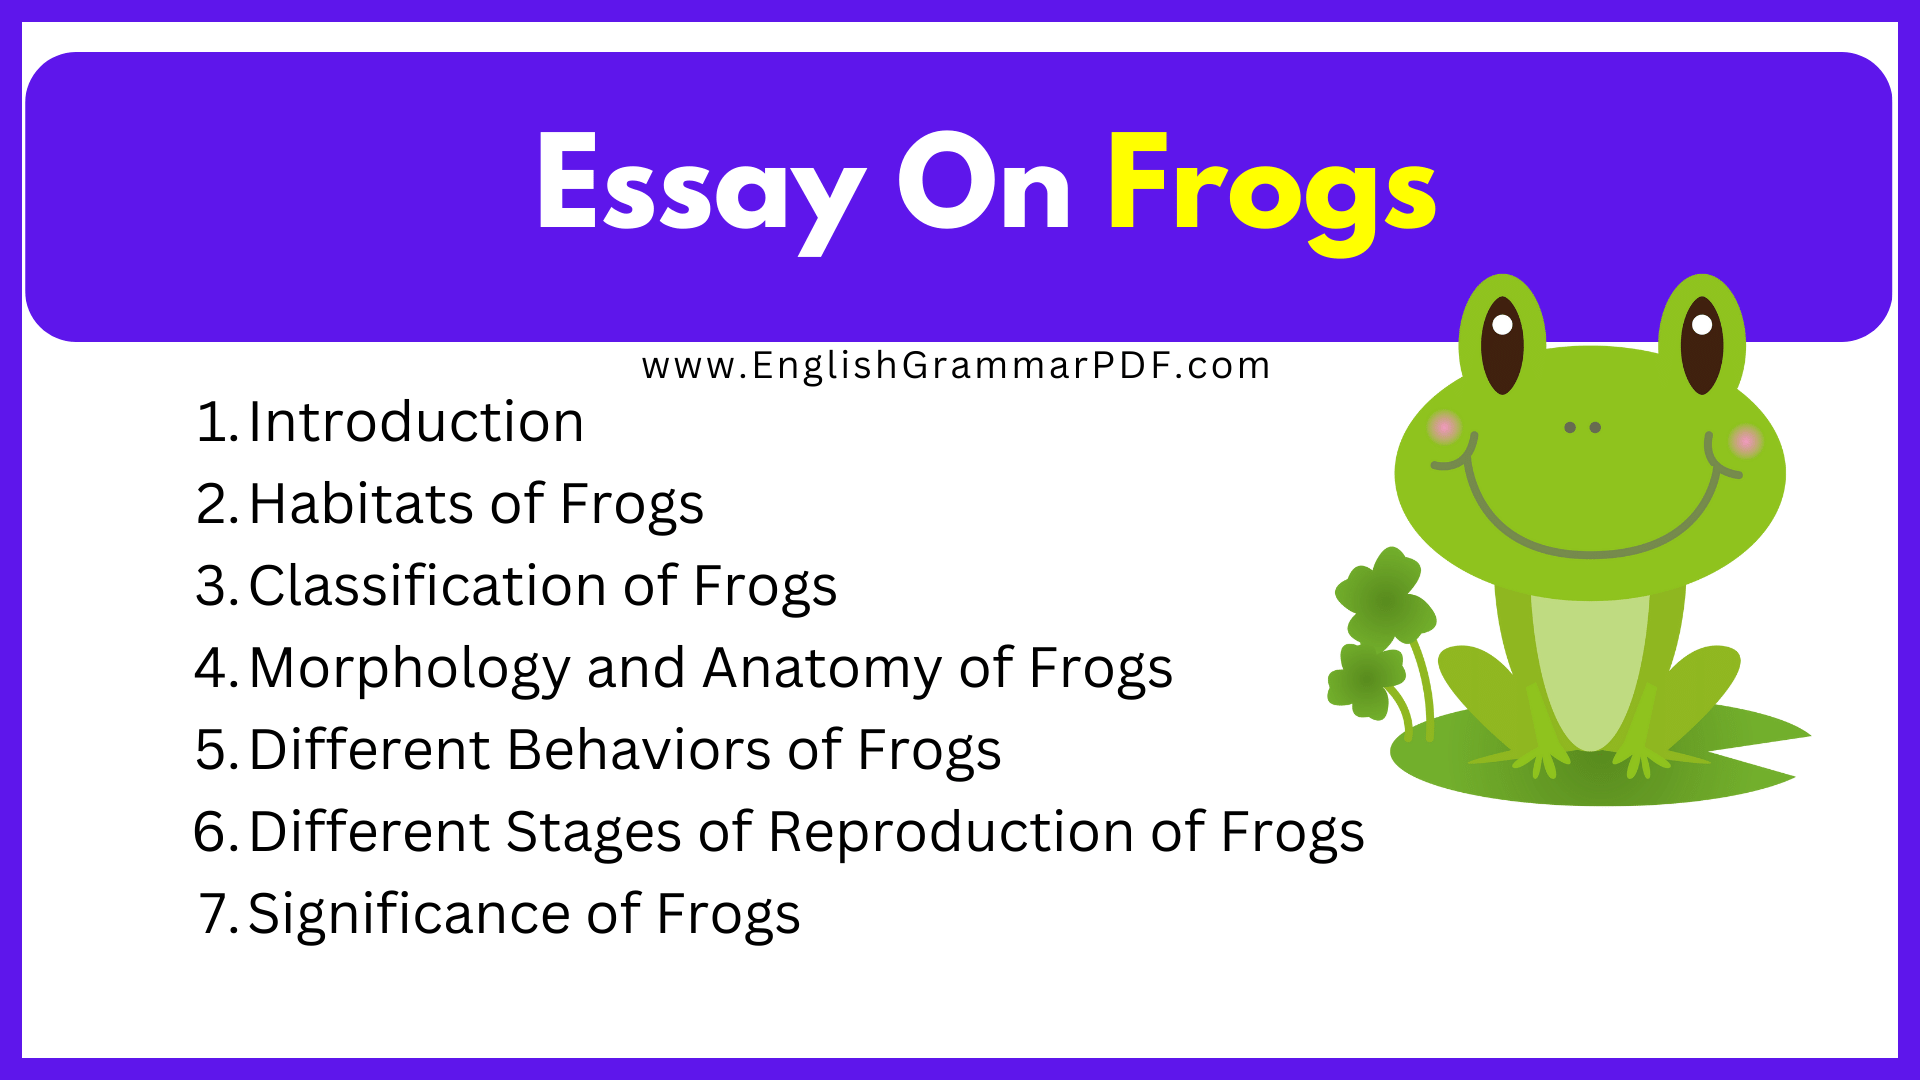 Essay On Frogs